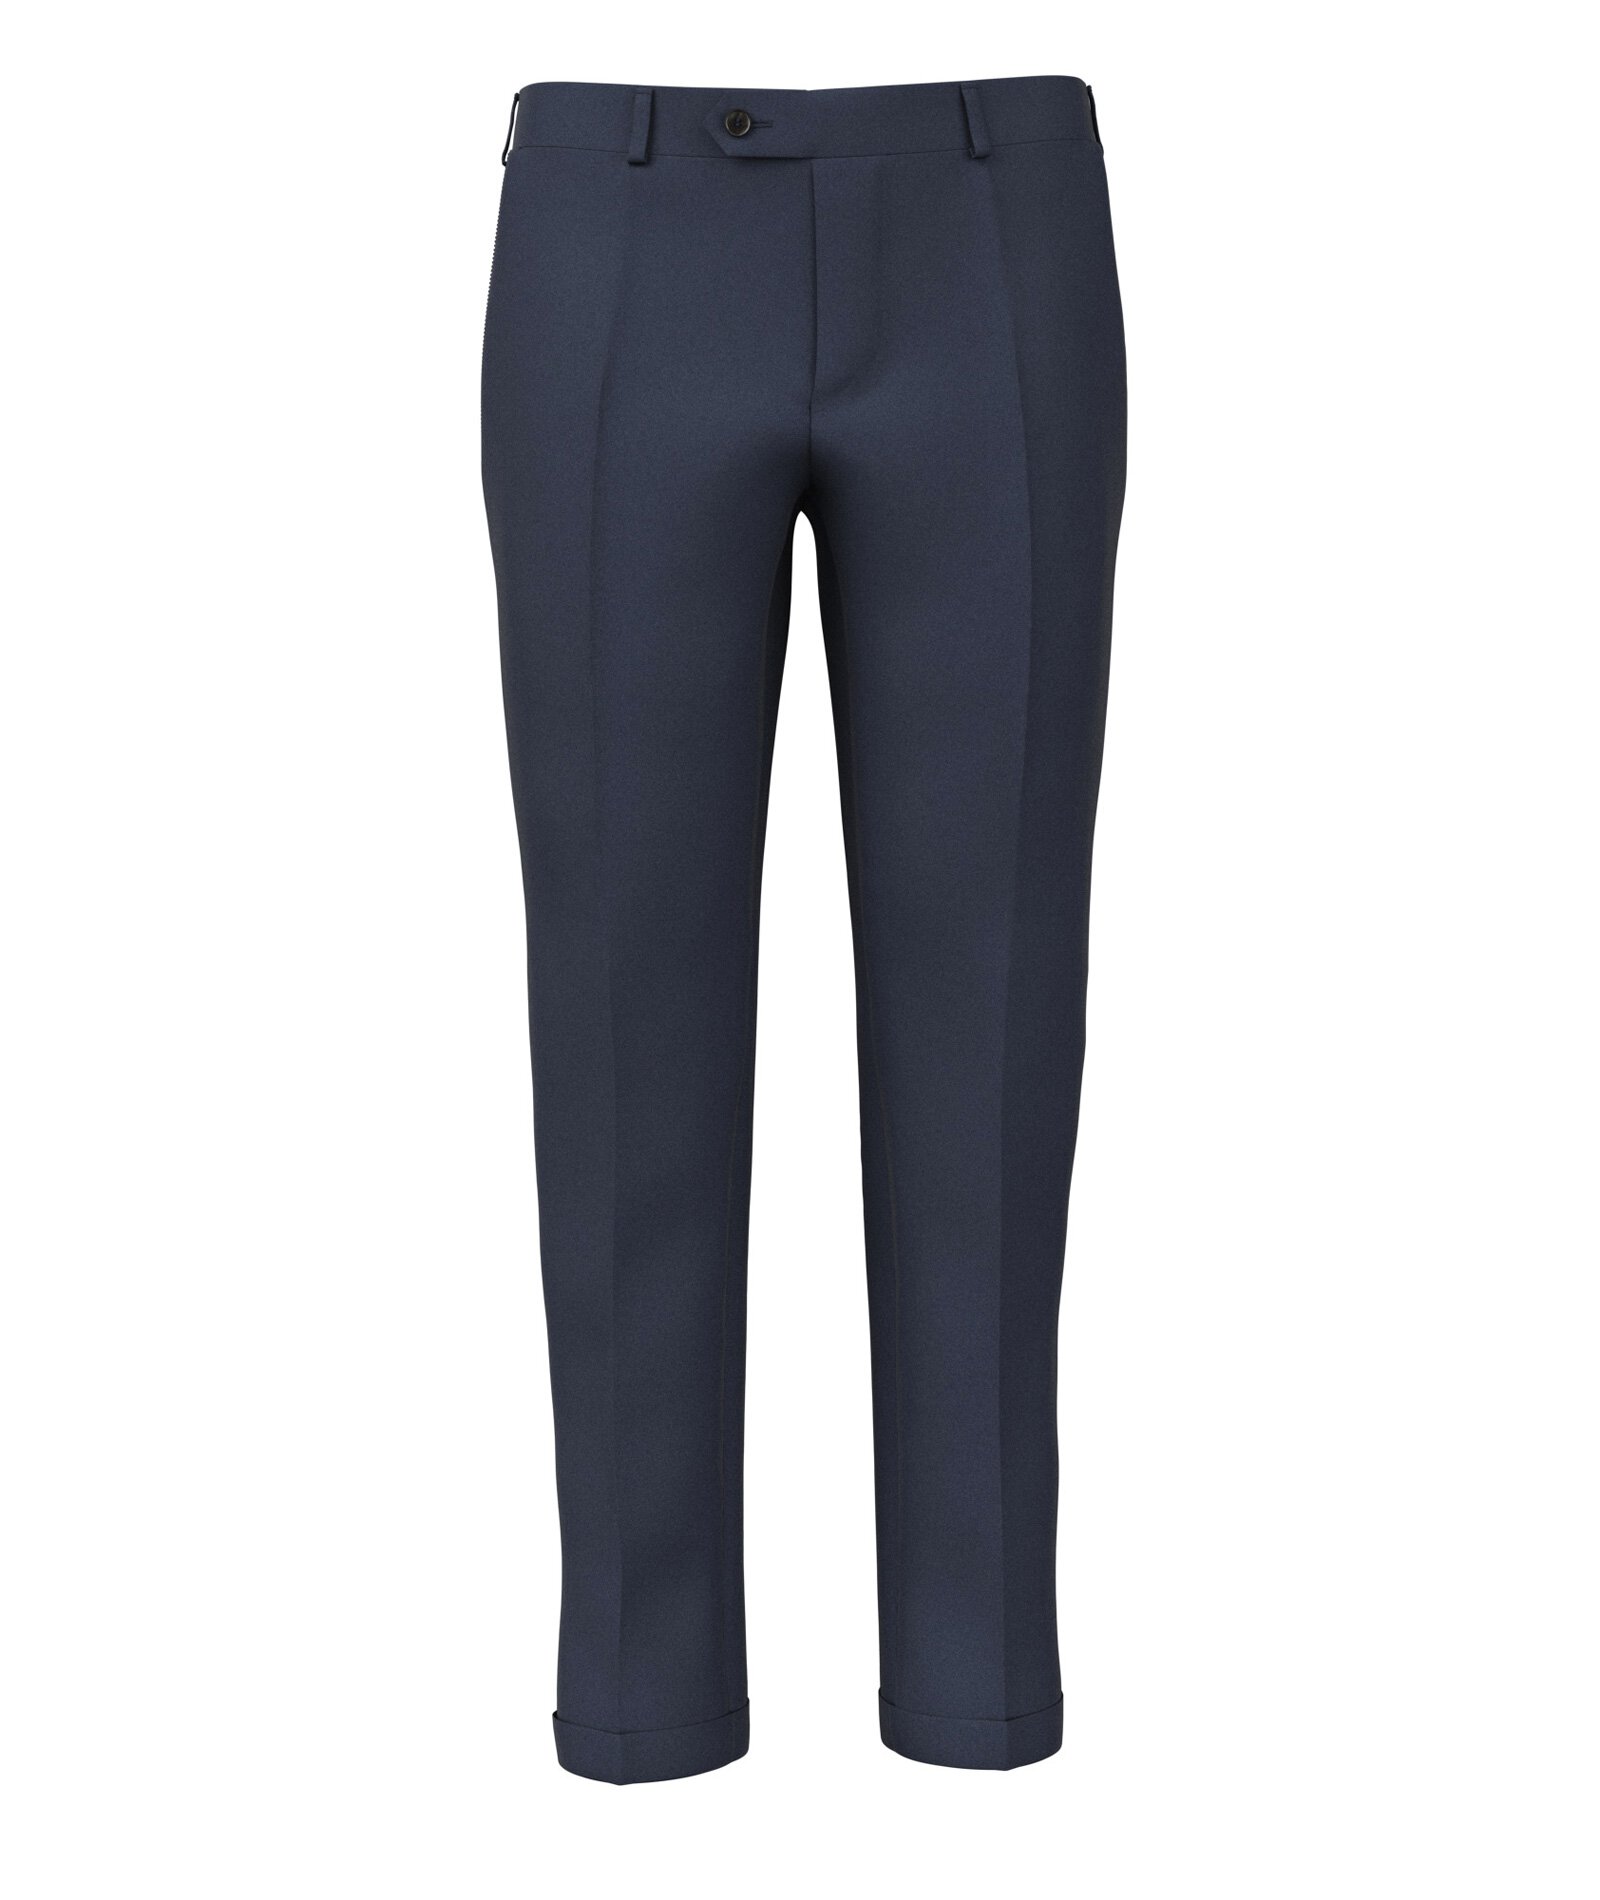 Made-to-Measure Men's dark blue-green trousers in stretch wool